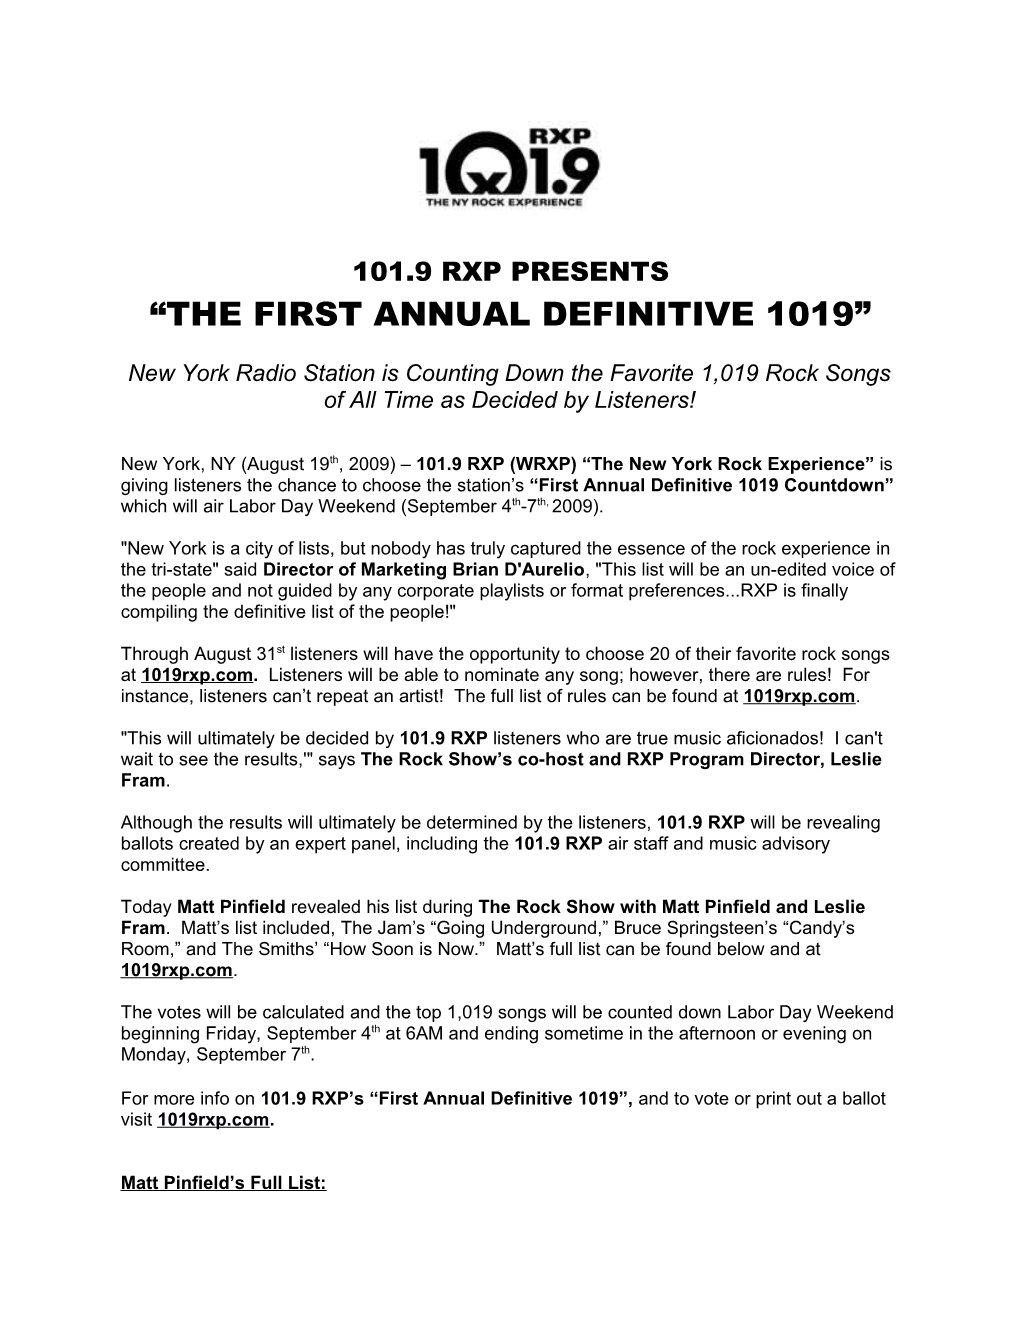 The First Annual Definitive 1019